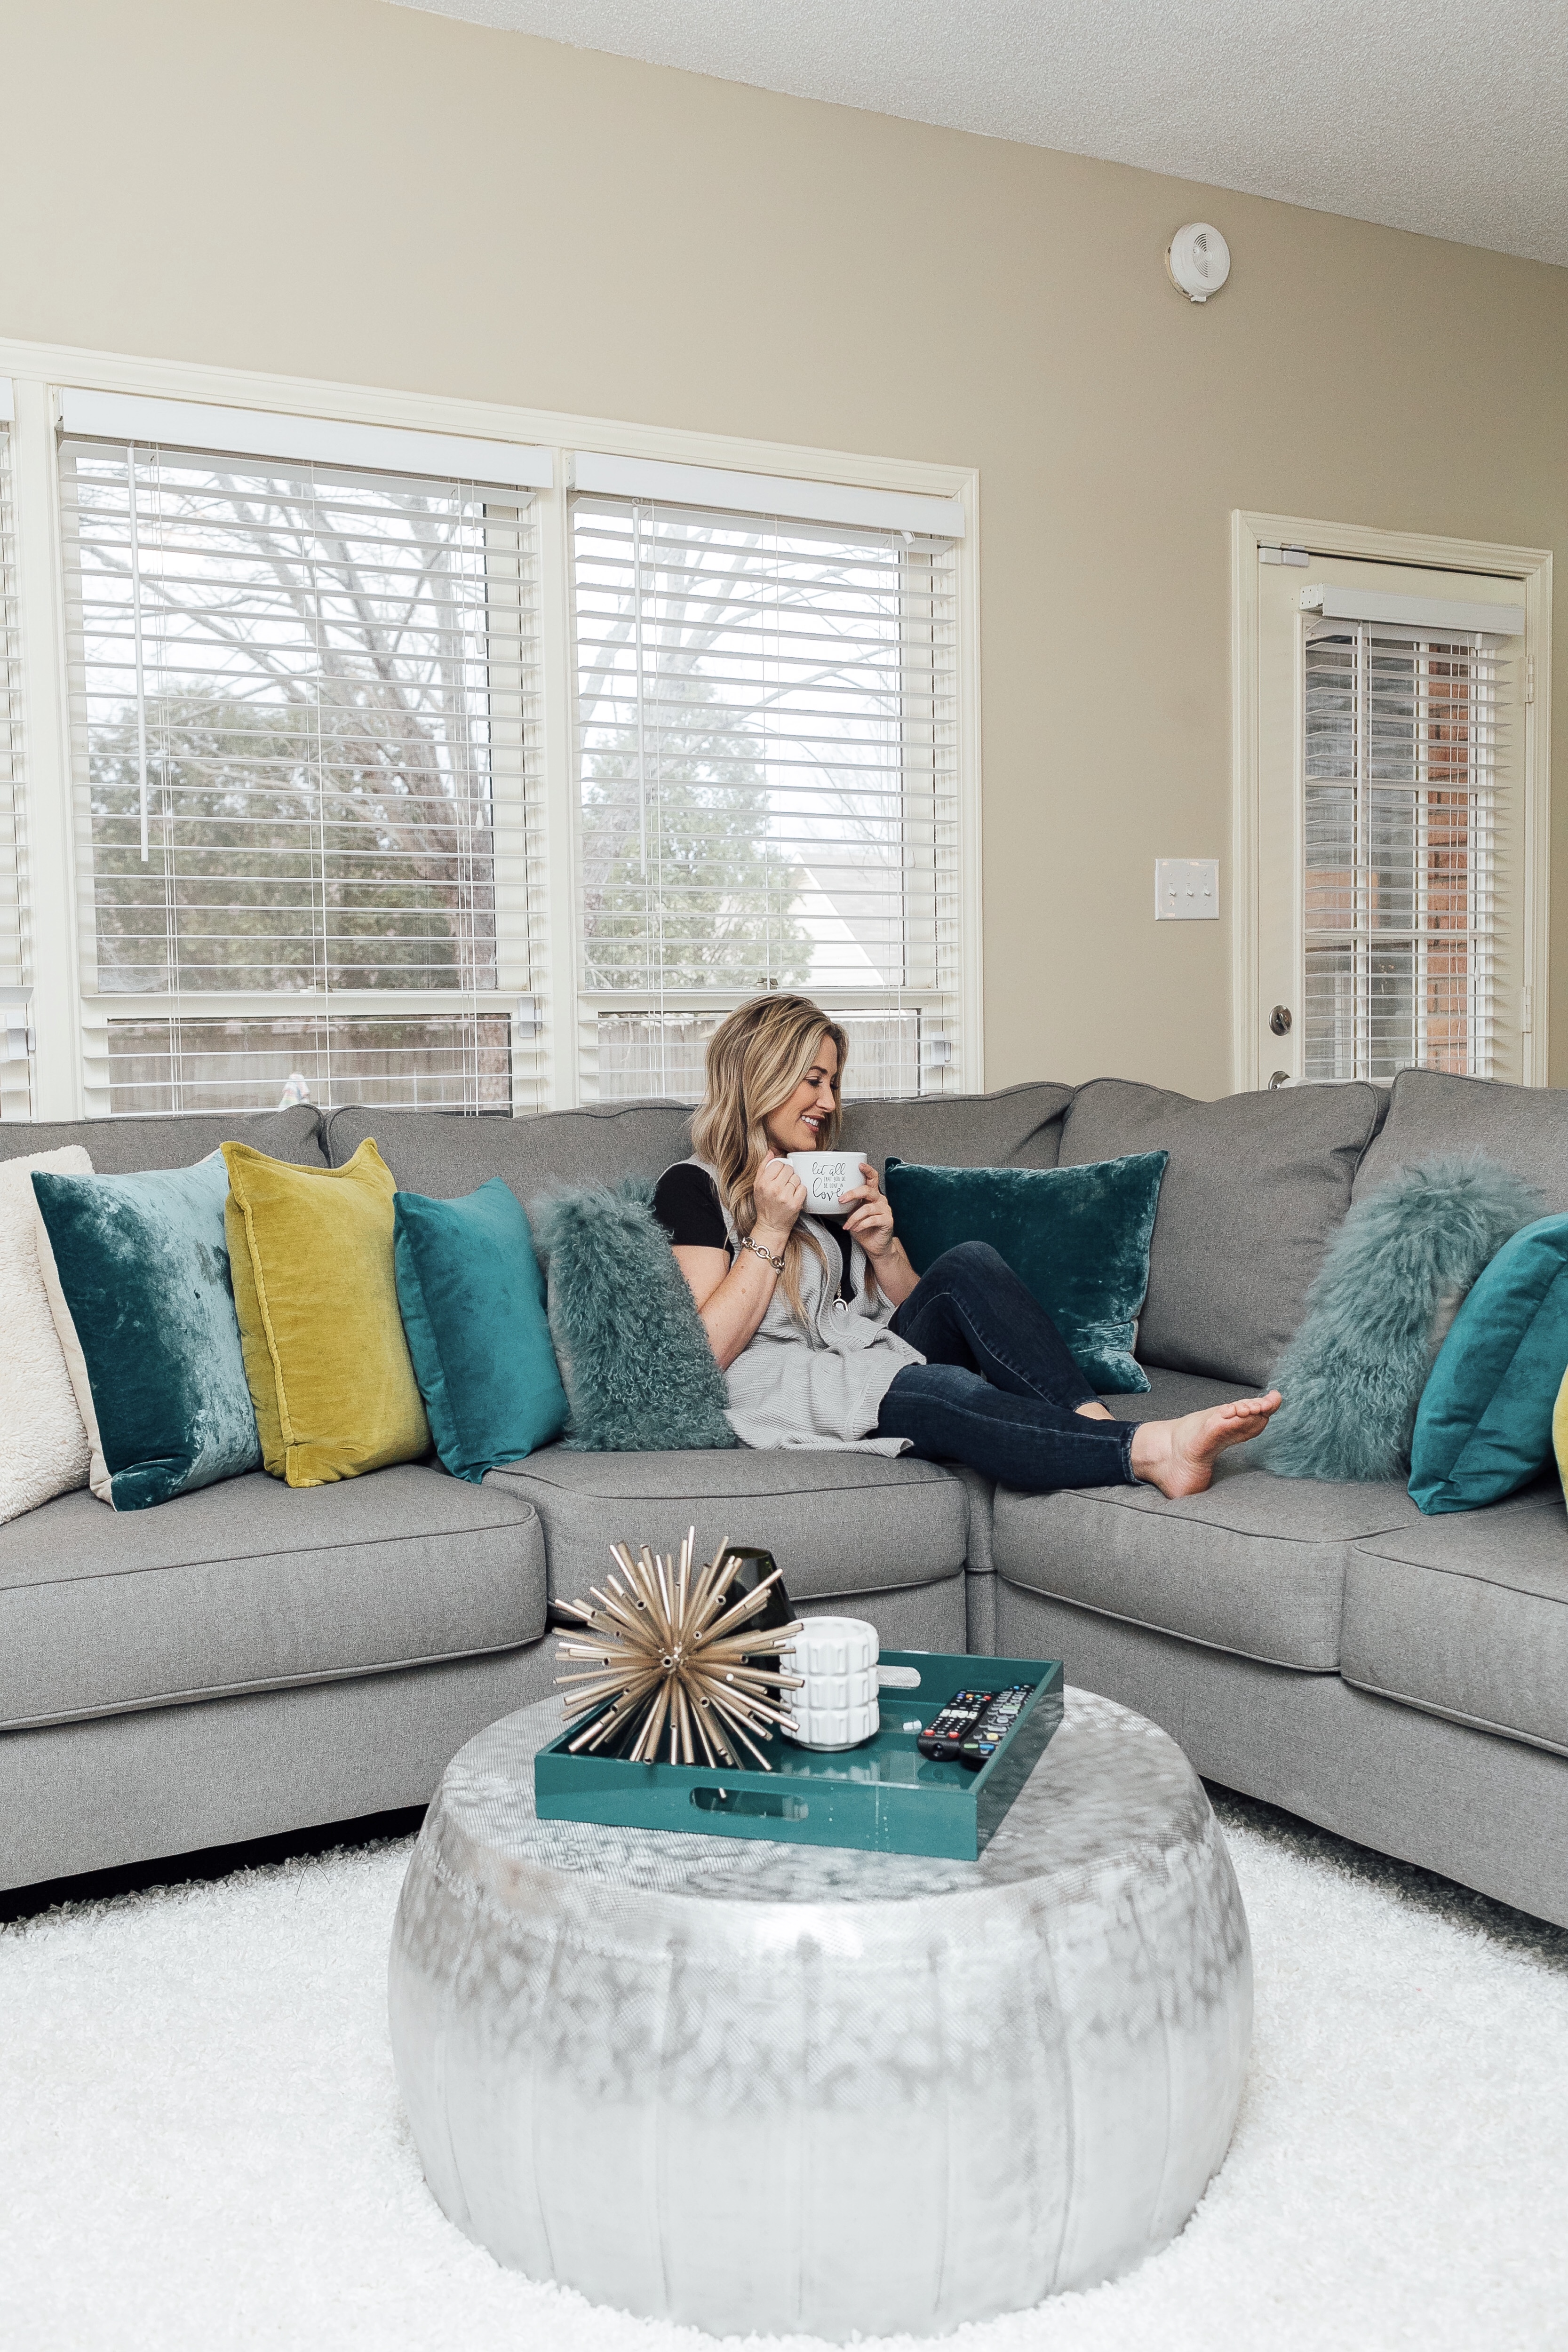 How to Update Your Home on a Budget featured by top US lifestyle blog, Walking in Memphis in High Heels: new sofa cushions